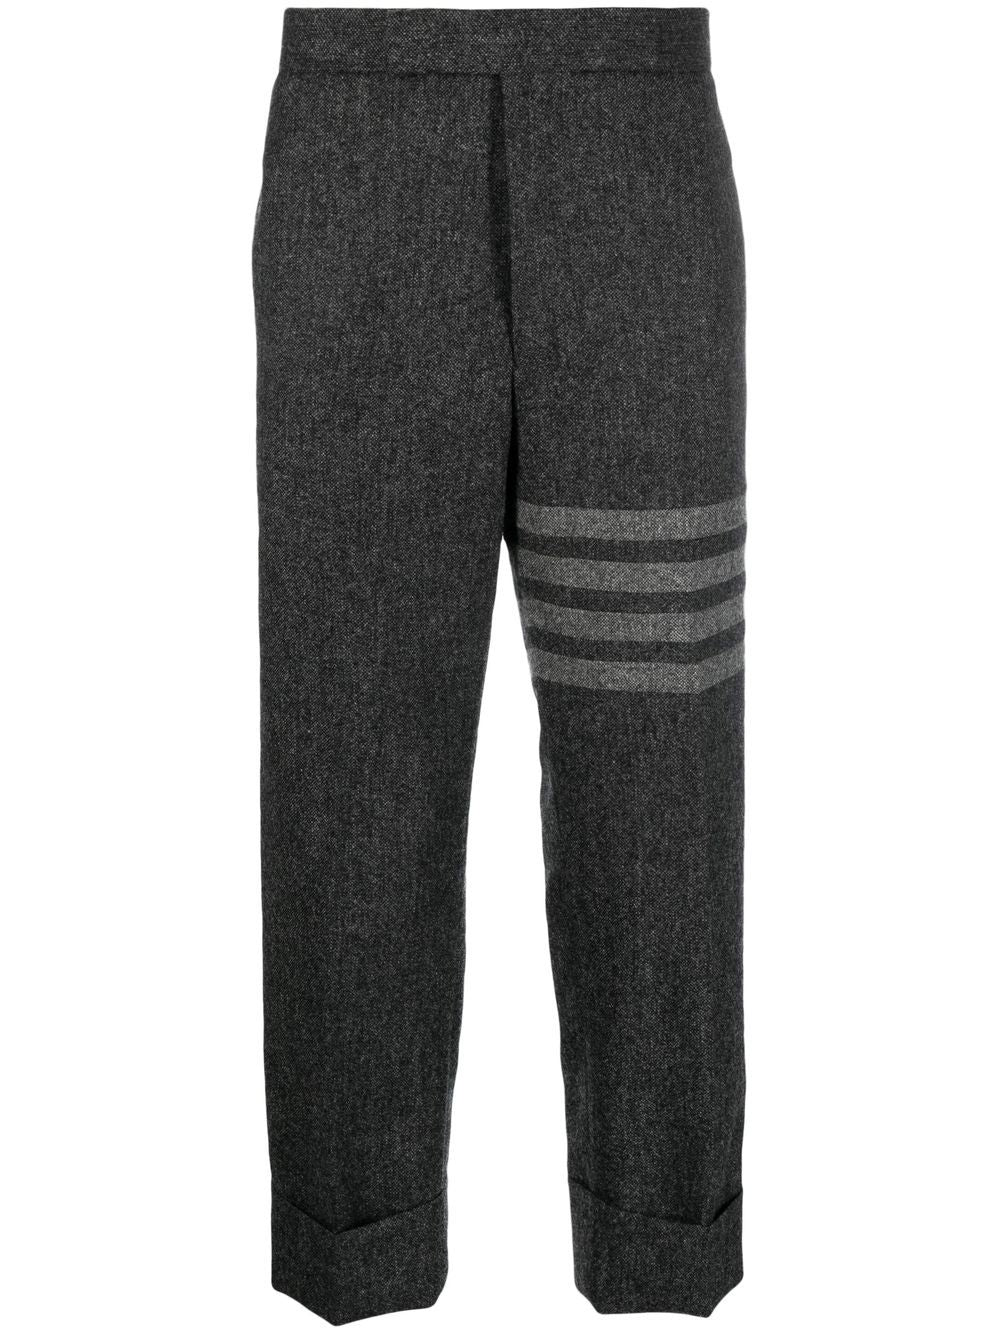 THOM BROWNE Men's Grey Tweed Drop-Crotch Trousers with Signature Stripe and Cropped Leg